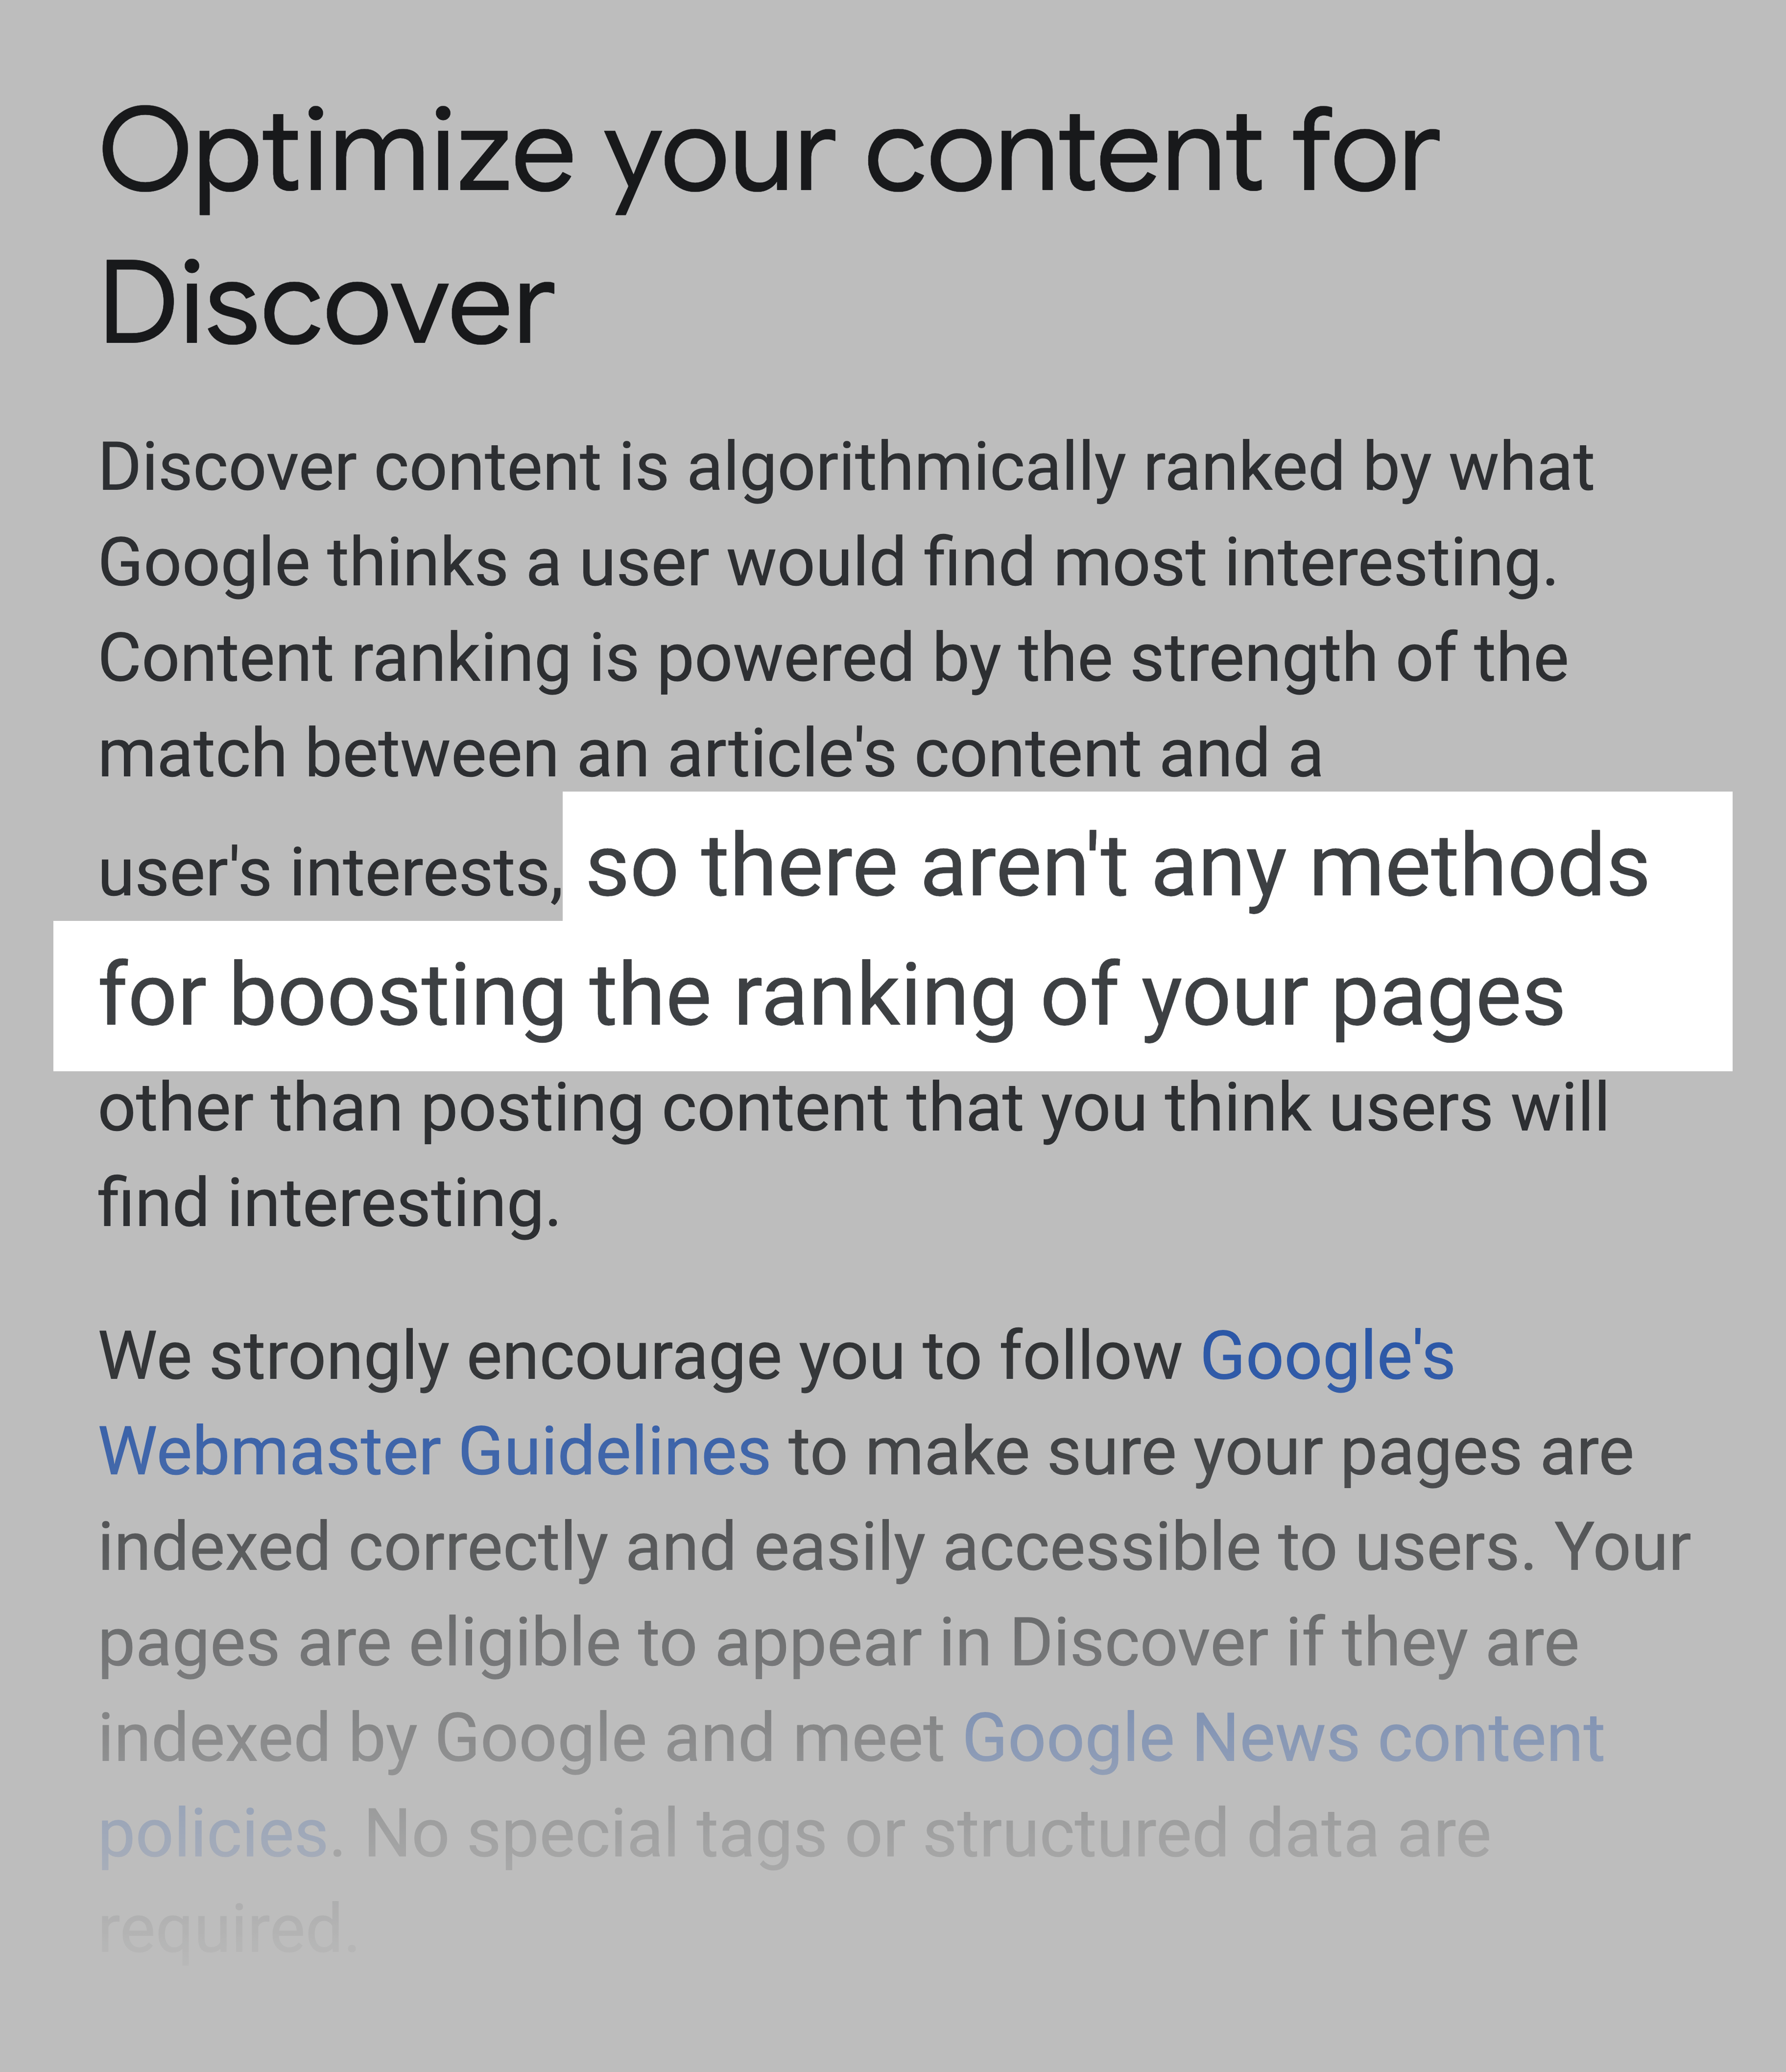 Google – Impossible to optimize for Discover